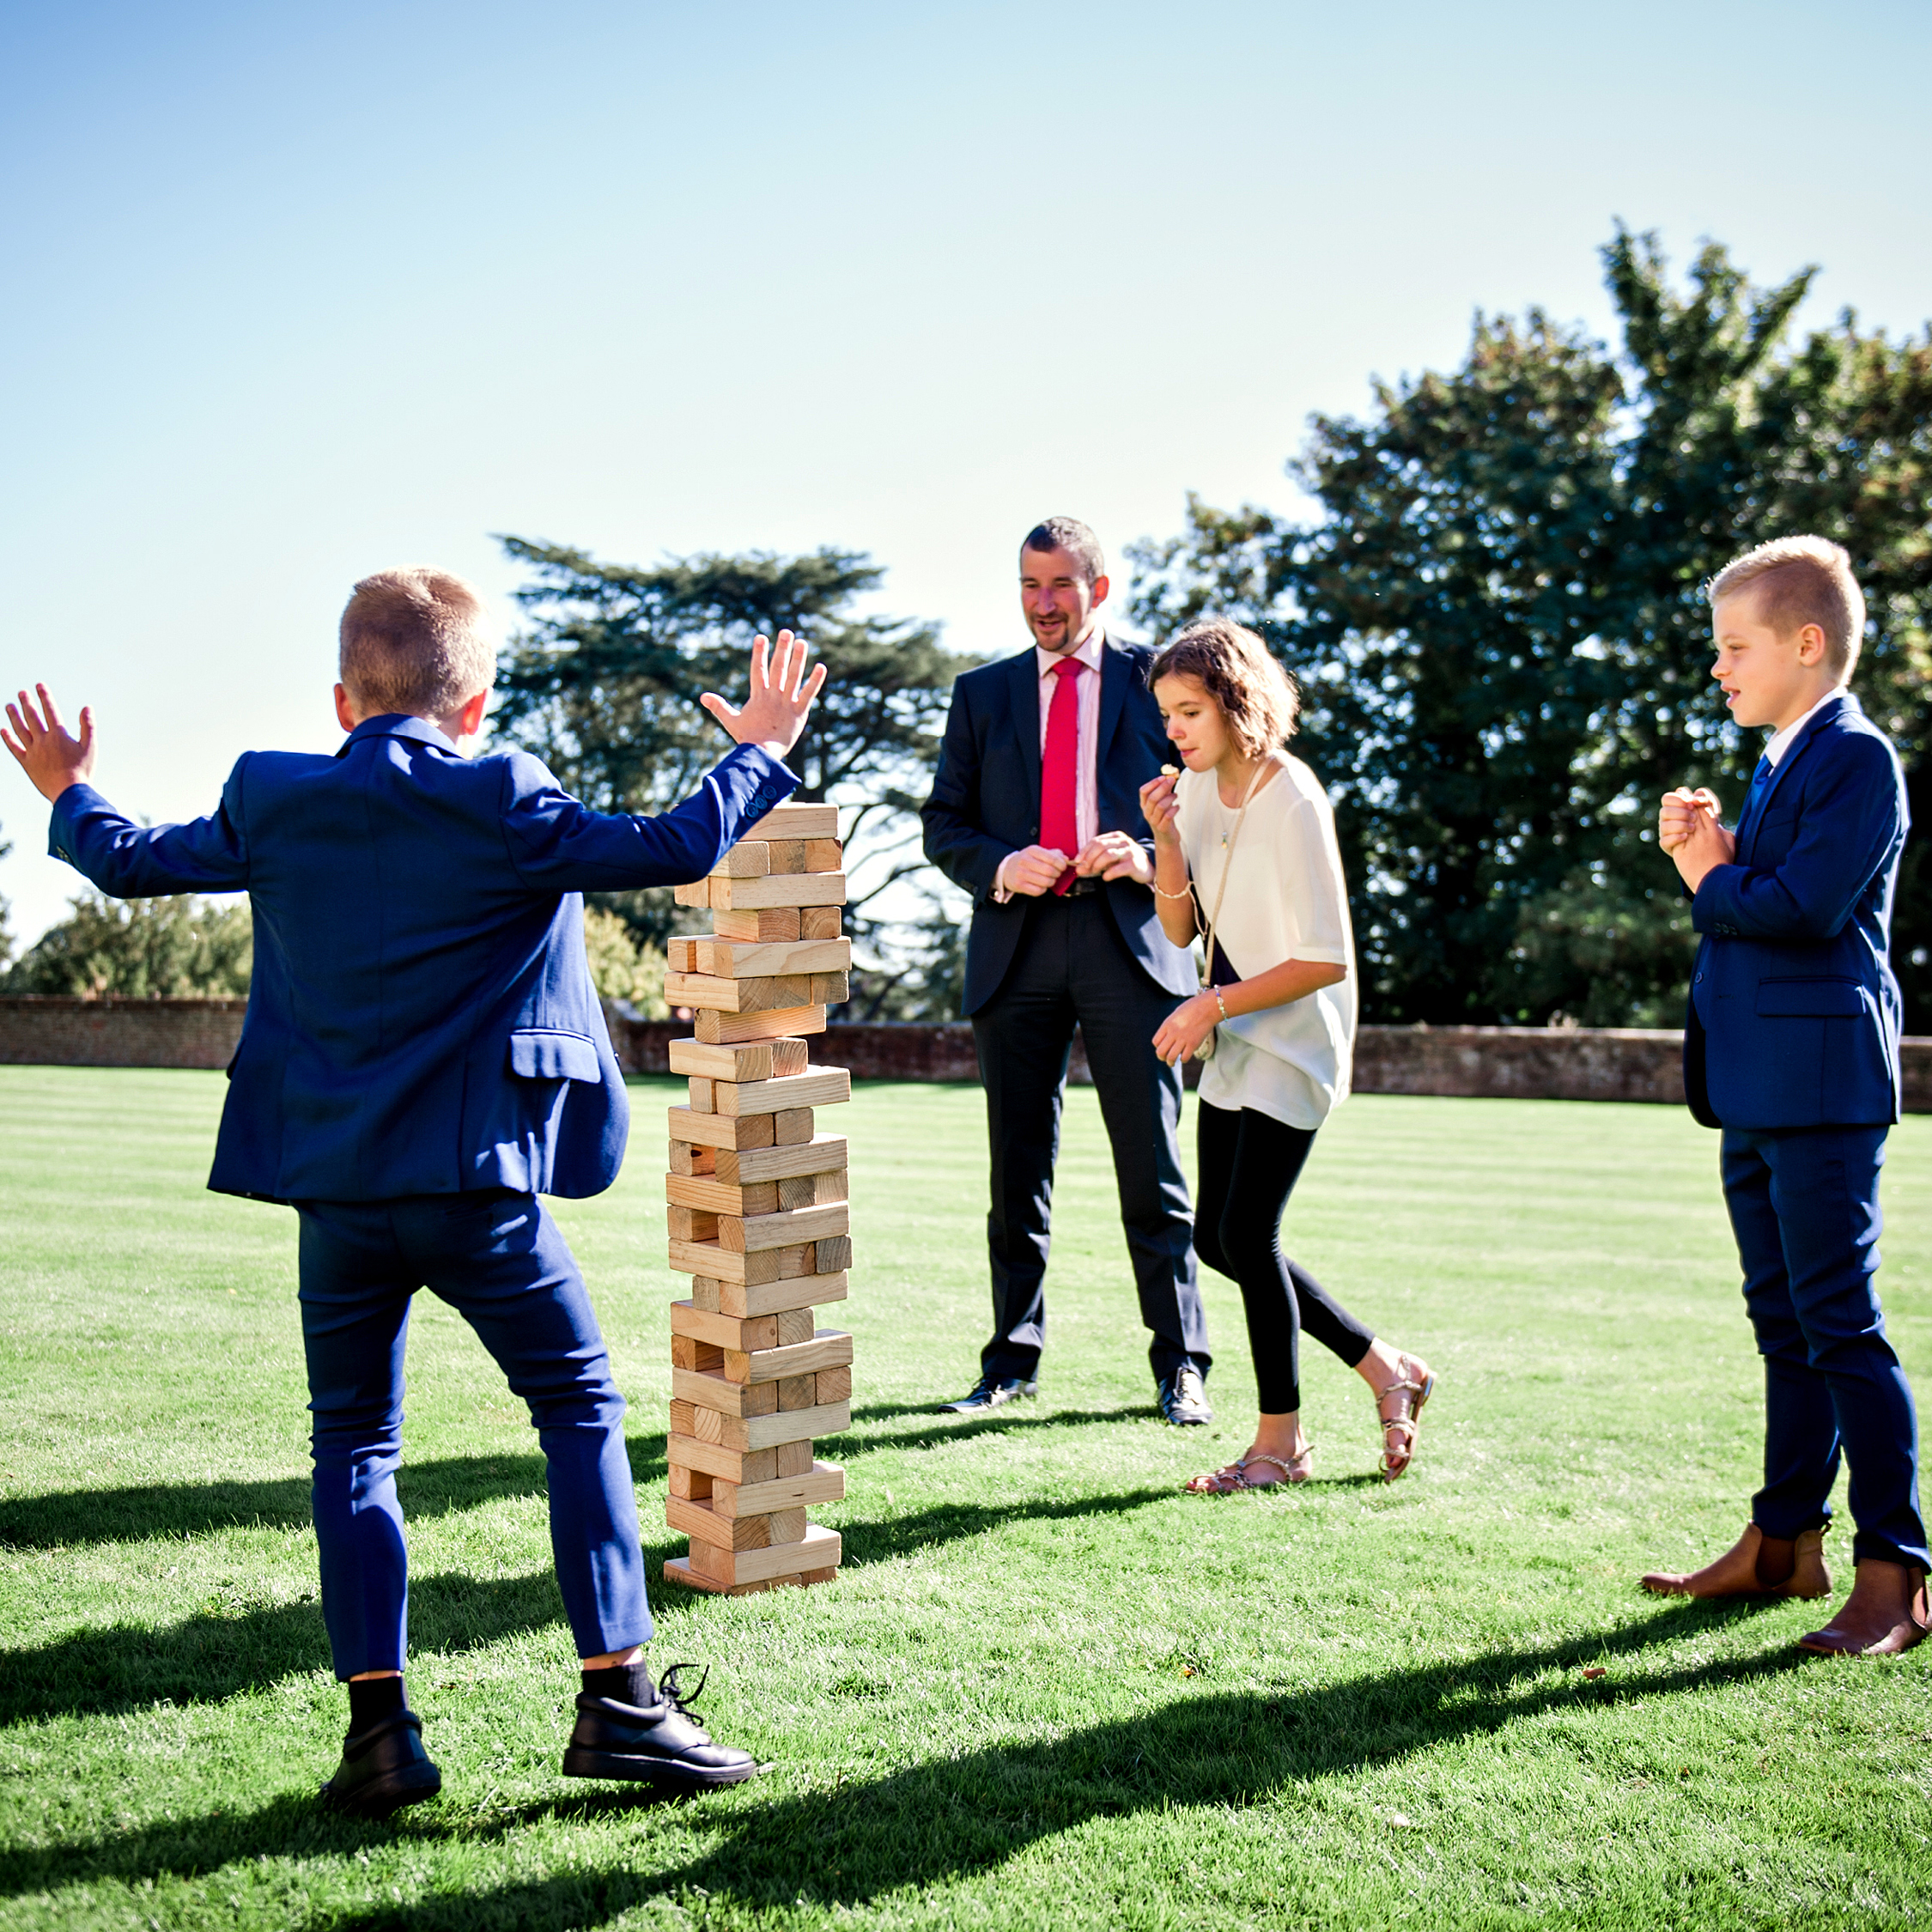 Creative Ways to Entertain Your Wedding Guests, giant wedding games